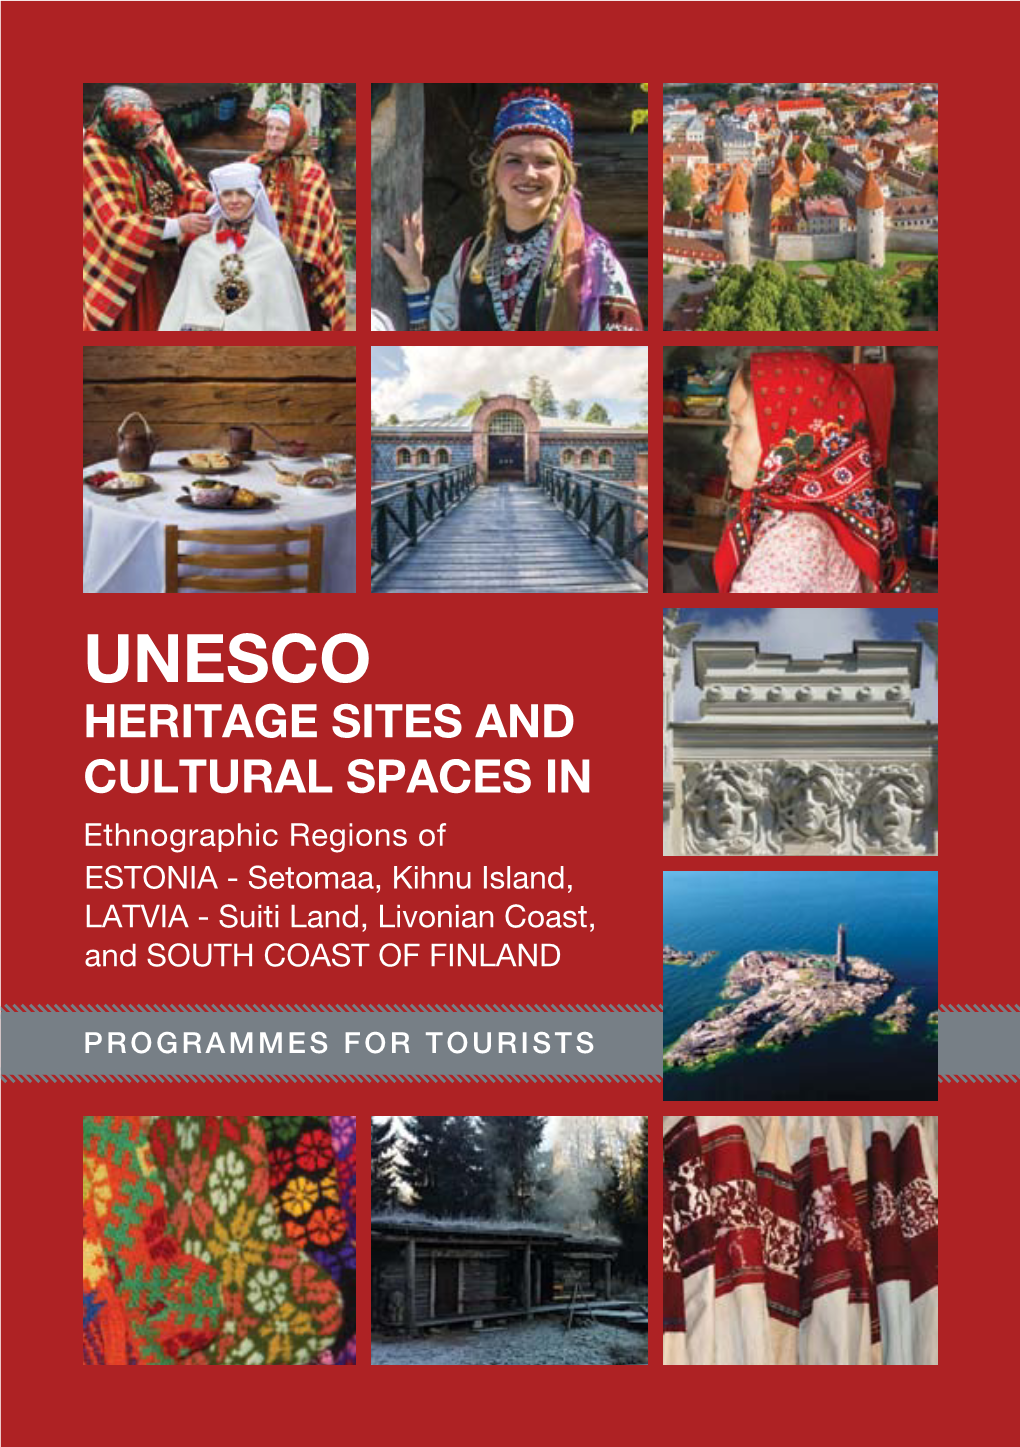 UNESCO Heritage Sites and Cultural Spaces in Ethnographic Regions of ESTONIA - Setomaa, Kihnu Island, LATVIA - Suiti Land, Livonian Coast, and SOUTH COAST of FINLAND